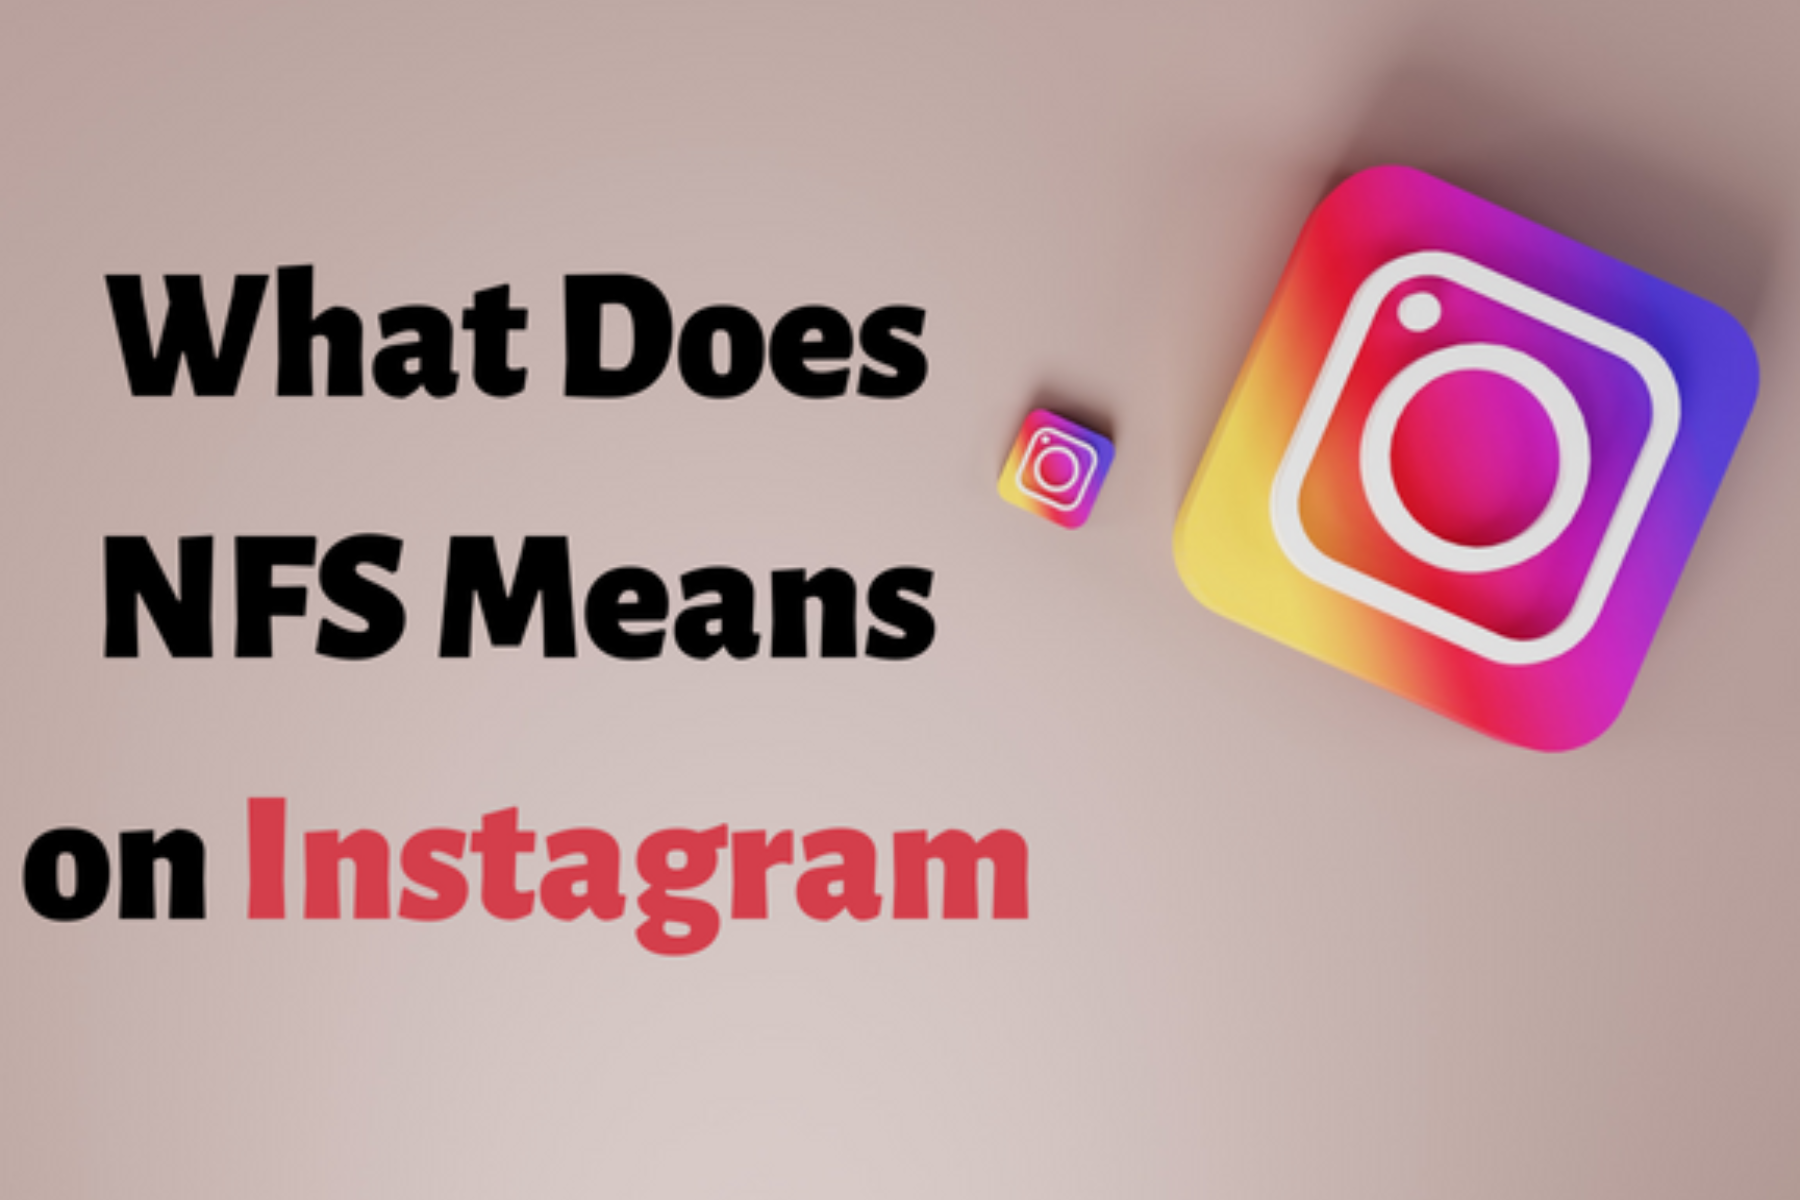 What Does NFS Mean On Instagram - The Role Of NFS In Instagram Marketing